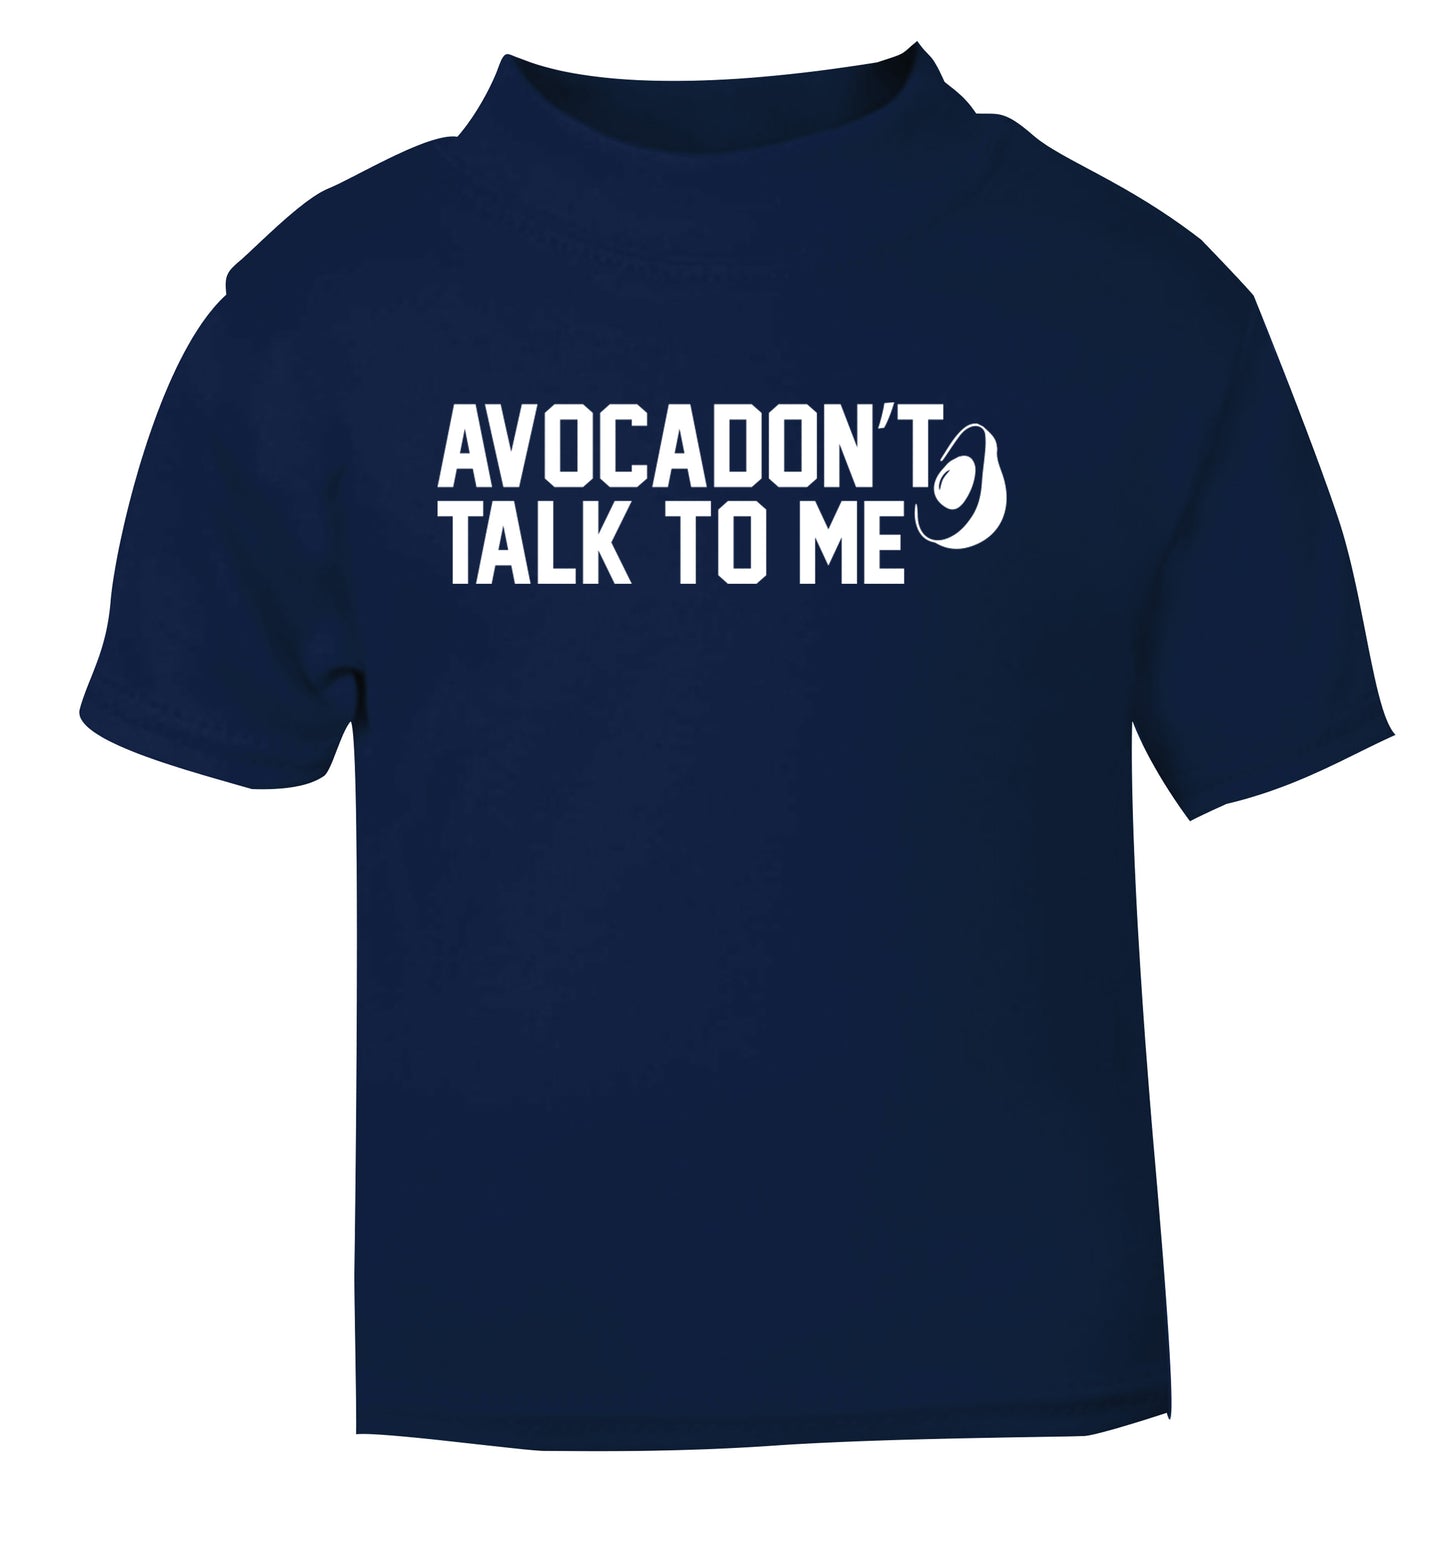 Avocadon't talk to me navy Baby Toddler Tshirt 2 Years